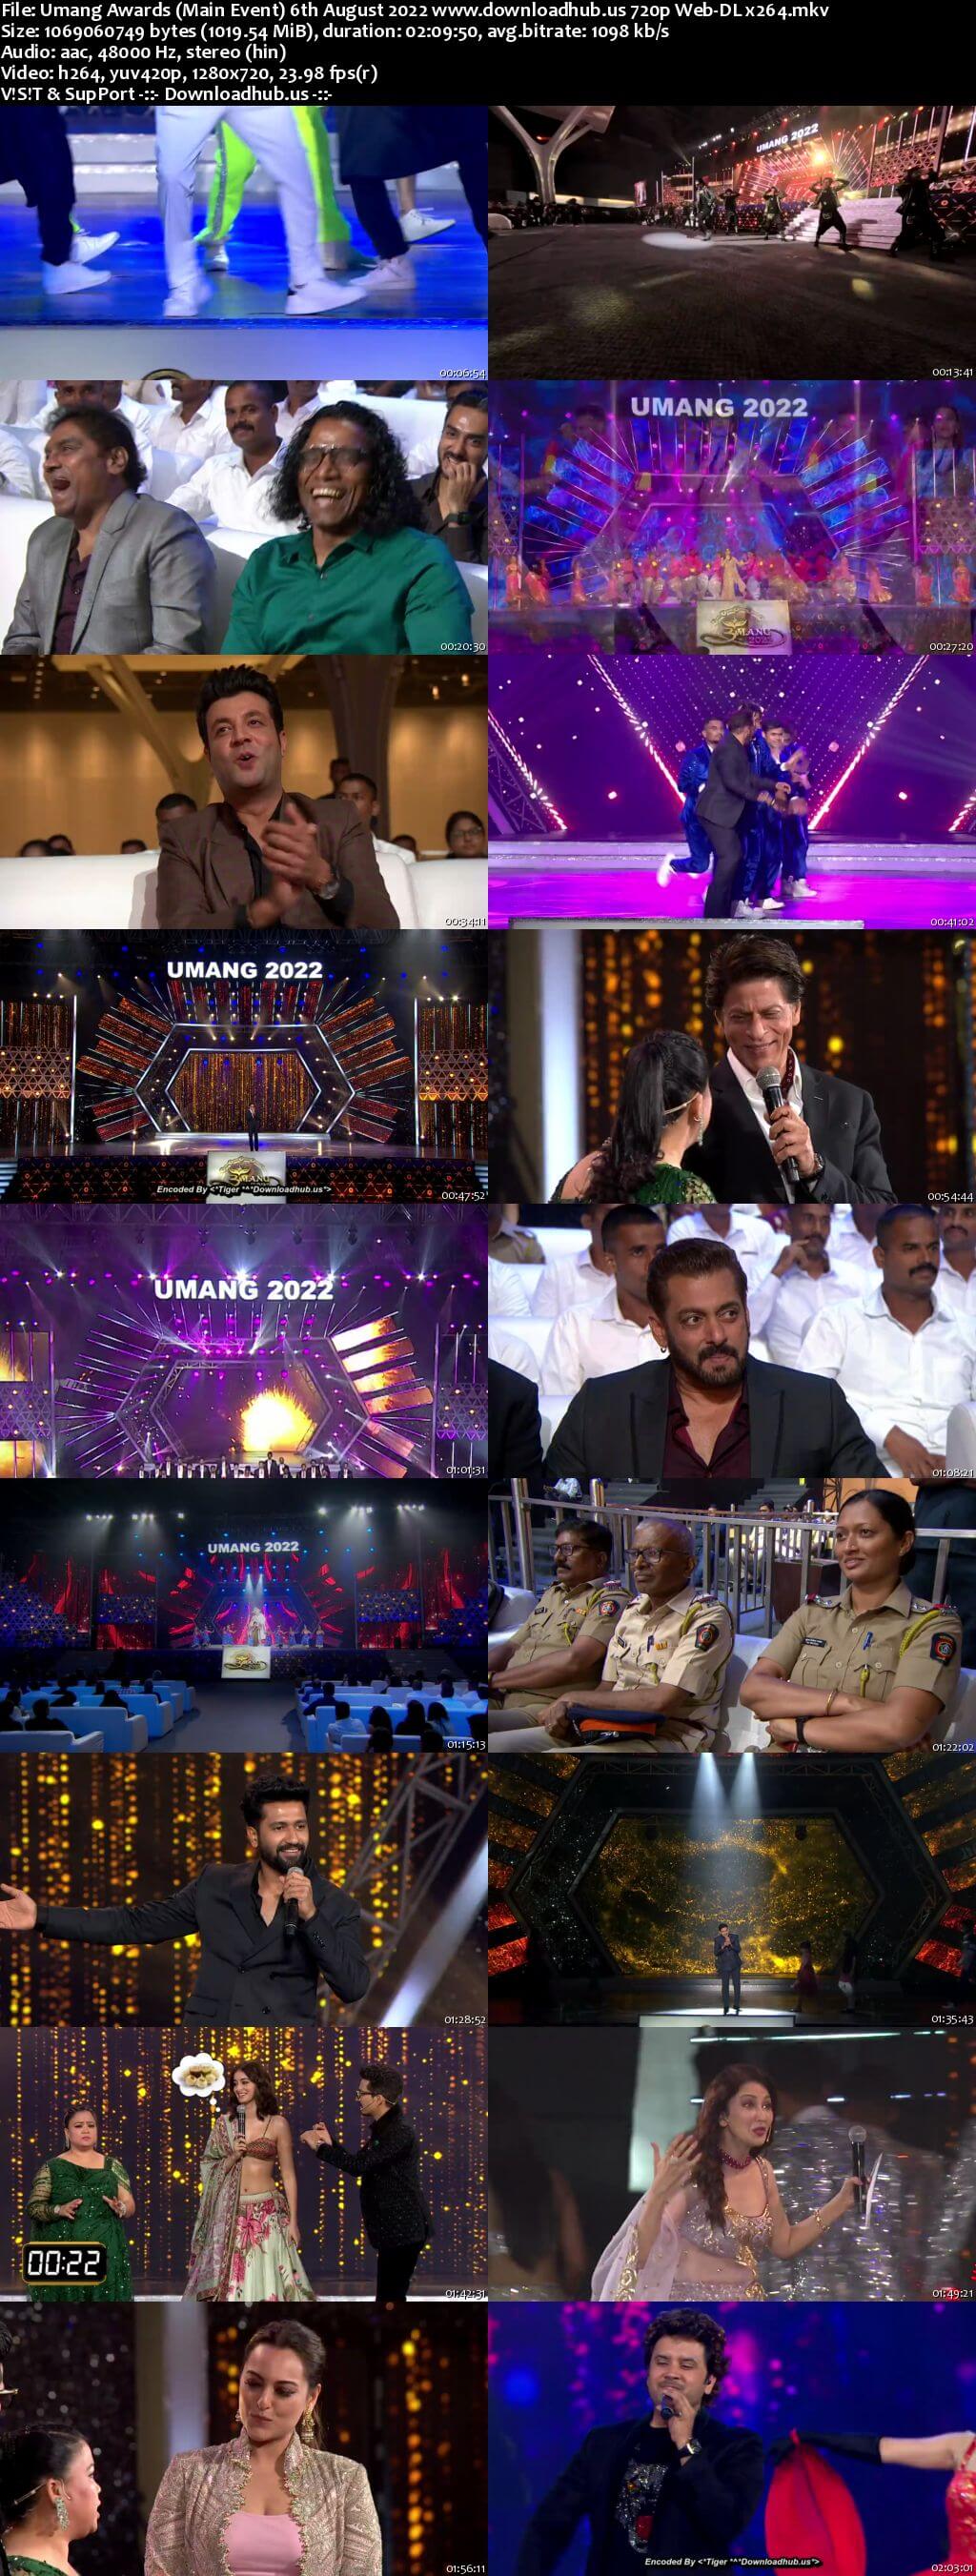 Umang Awards (Main Event) 6th August 2022 720p 480p Web-DL x264